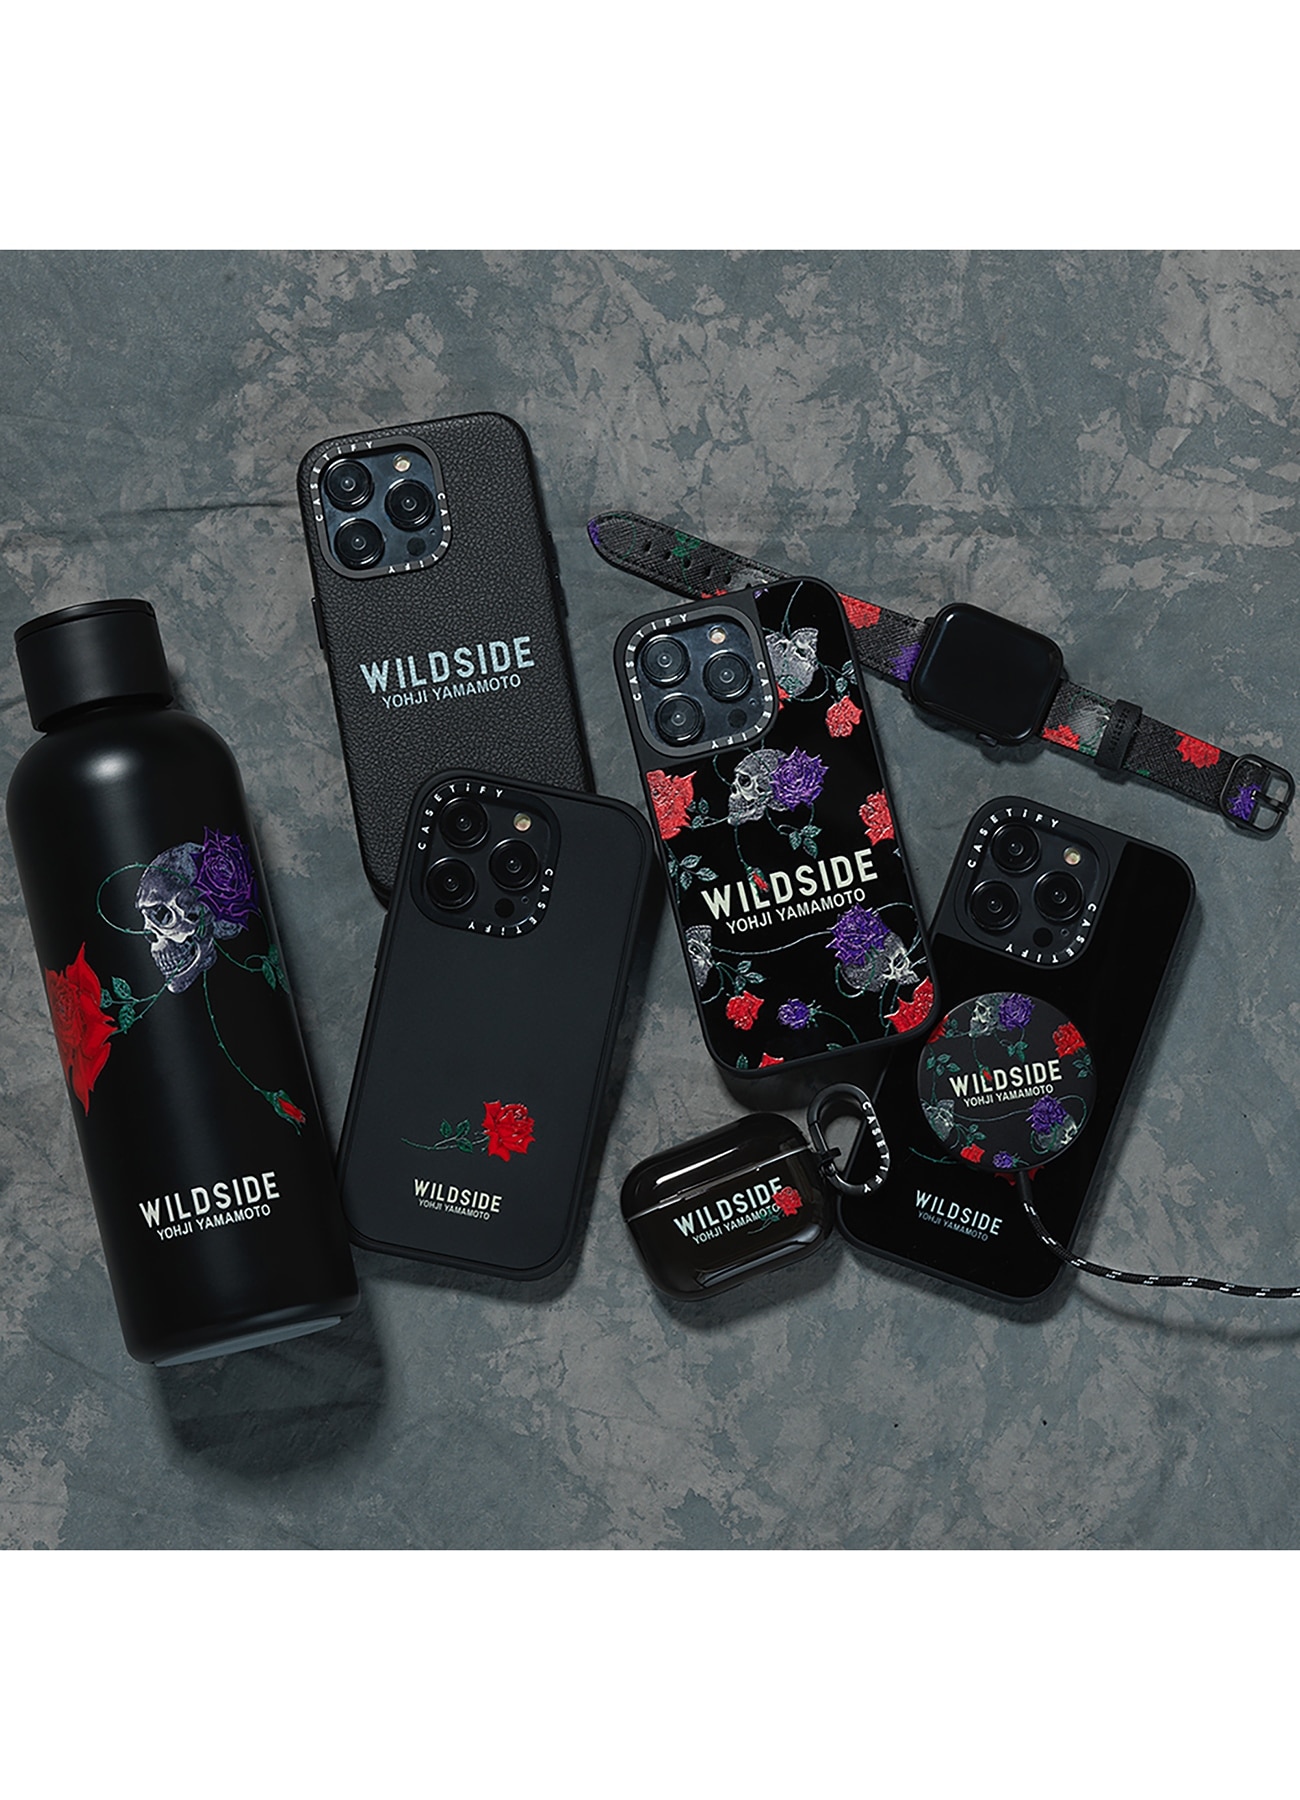 WILDSIDE×CASETiFY ROSE Airpods case(Airpods Pro 第一世代)